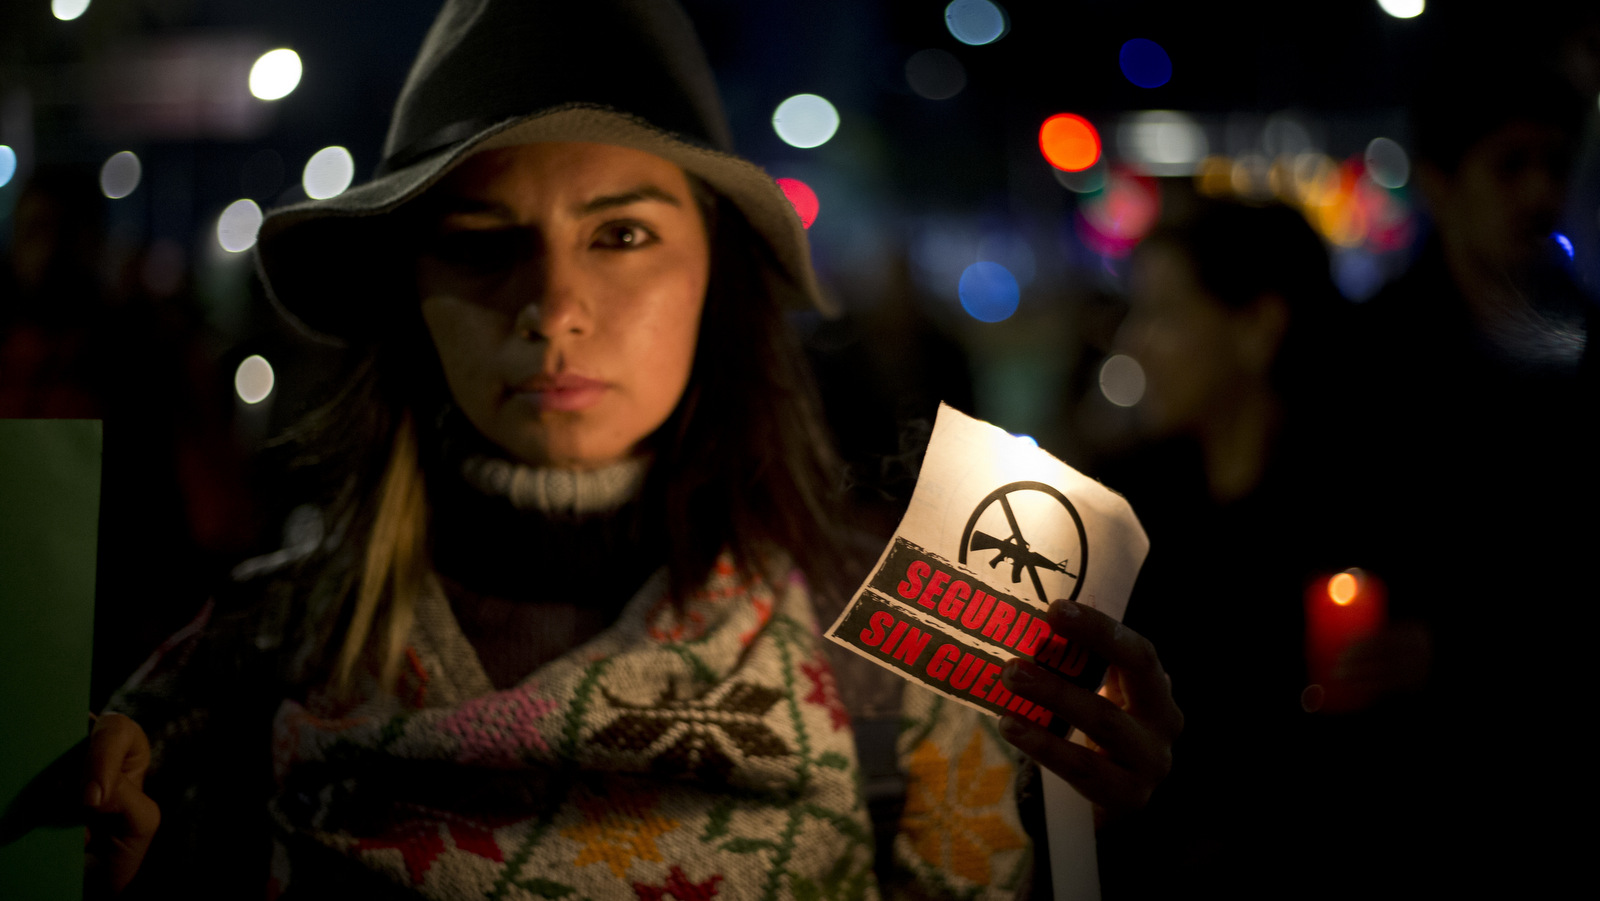 A woman carries a sign that says in Spanish "Security without war" during a candlelight protest against a newly proposed security law in Mexico City, Dec. 13, 2017. Mexico's ruling party rammed a bill through Congress' lower house on Dec. 7 giving the military legal justification to act as police, triggering objections by those who said it would effectively militarize the country. The legislation is now with the Senate. (AP/Eduardo Verdugo)